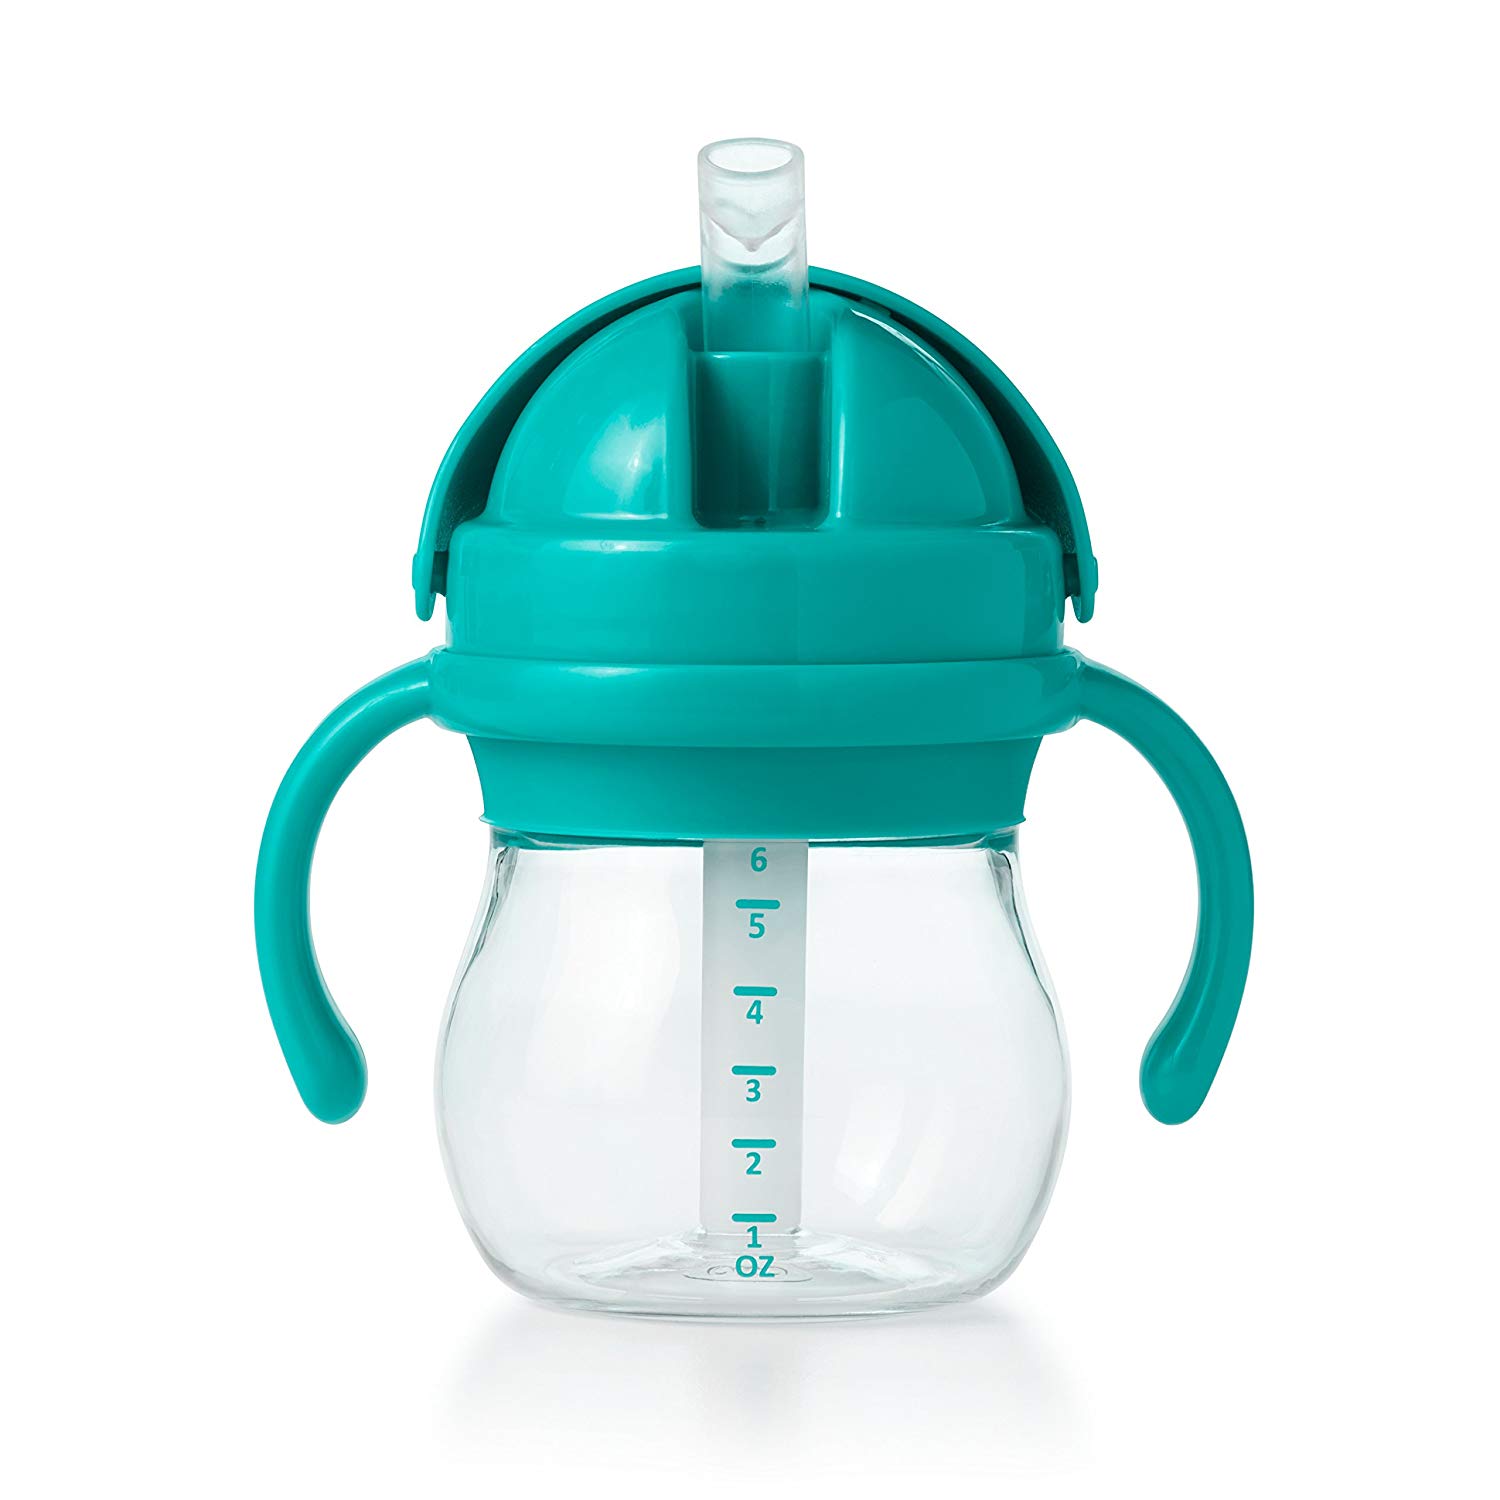 https://tickledbabies.com/wp-content/uploads/2020/03/OXO-Tot-Grow-Straw-Cup-With-Handles-6-Oz-Teal-Image02.jpg